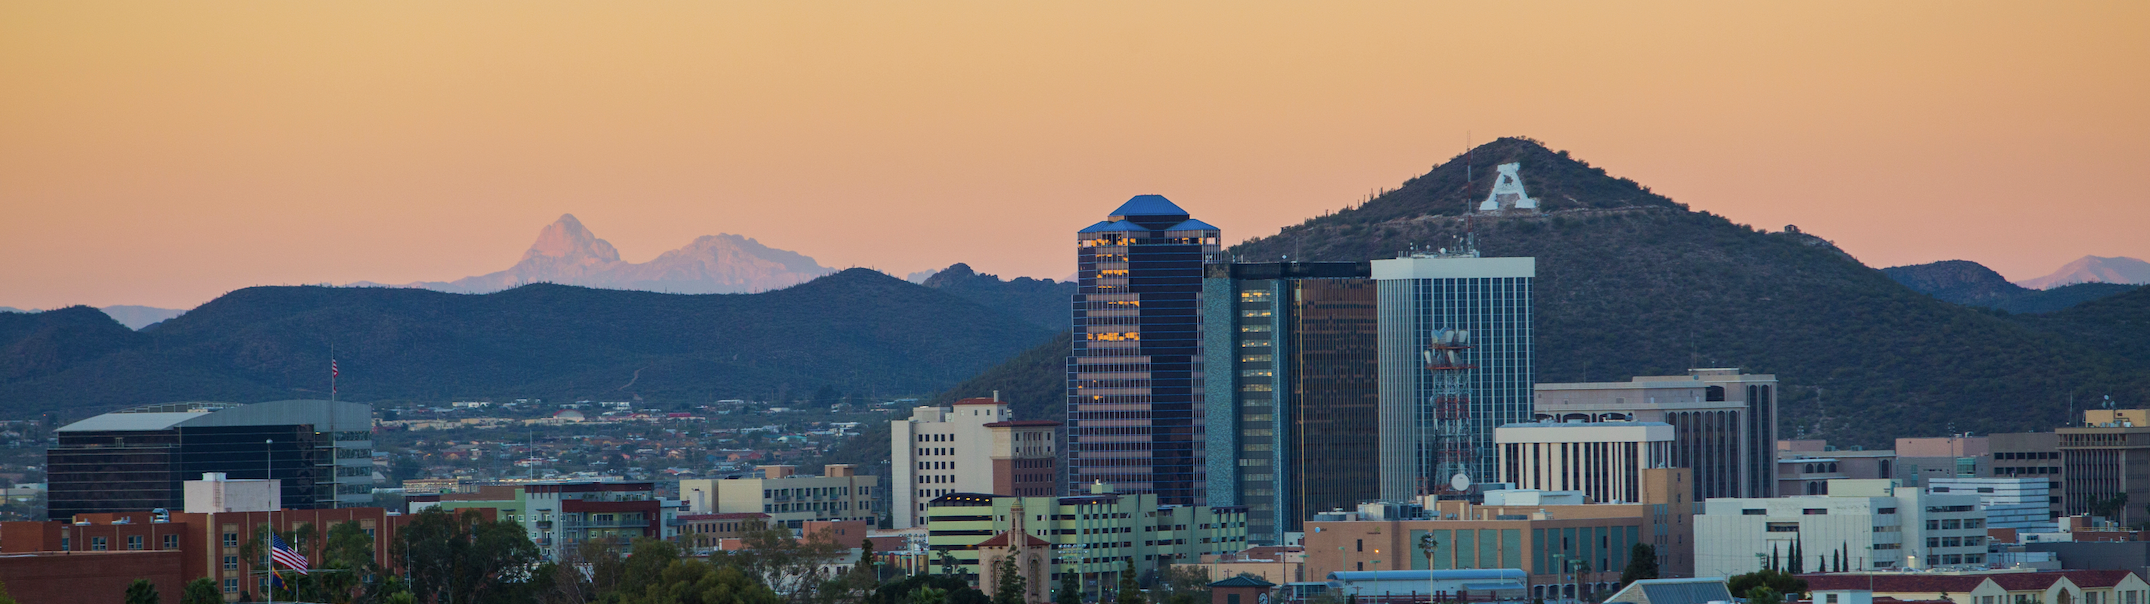 Tucson cityscape and A mountain